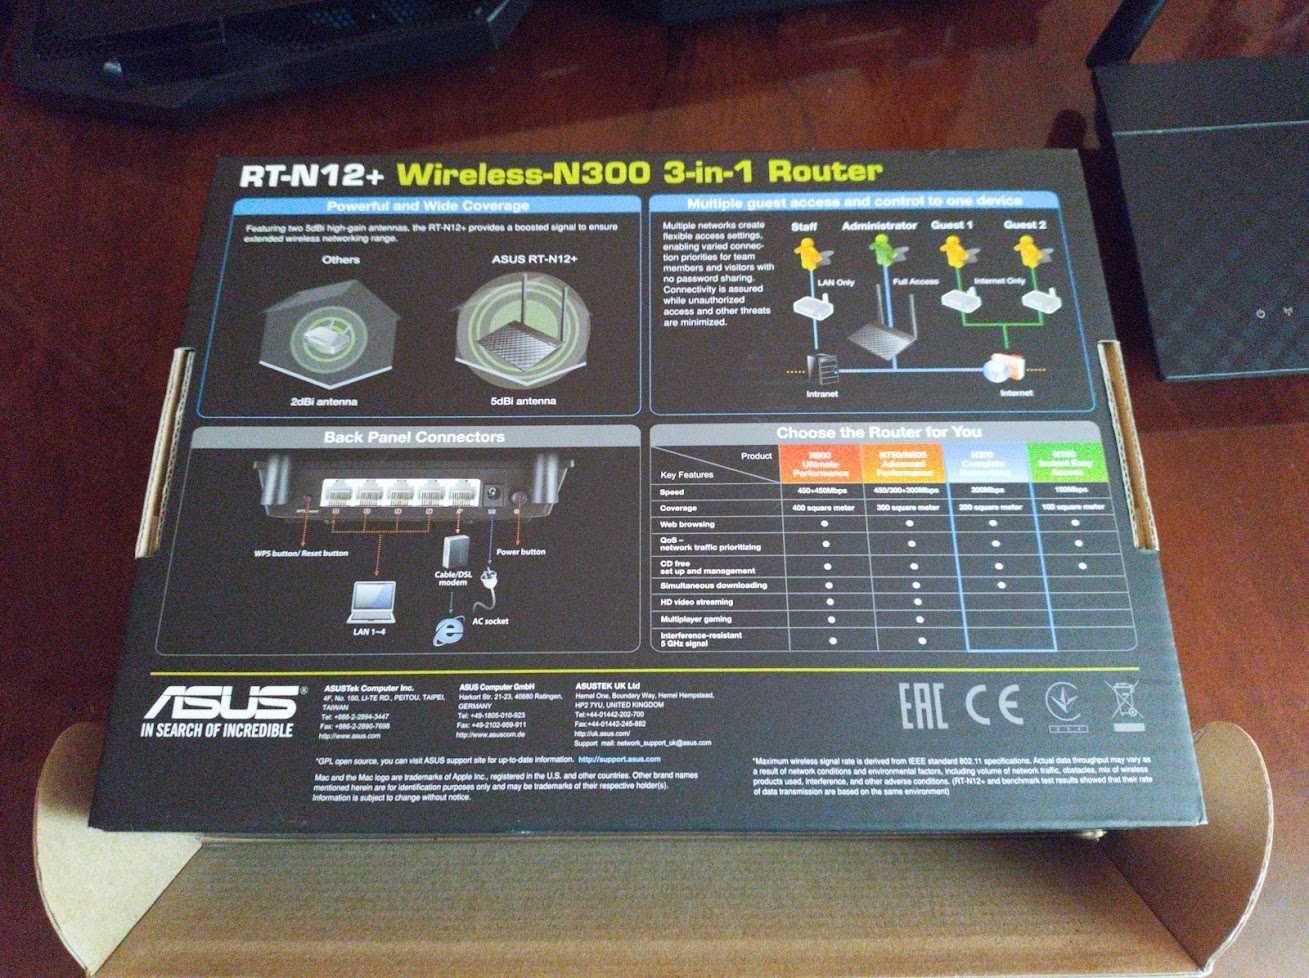 VAND Router wireless ASUS RT-N12+, 300Mbps